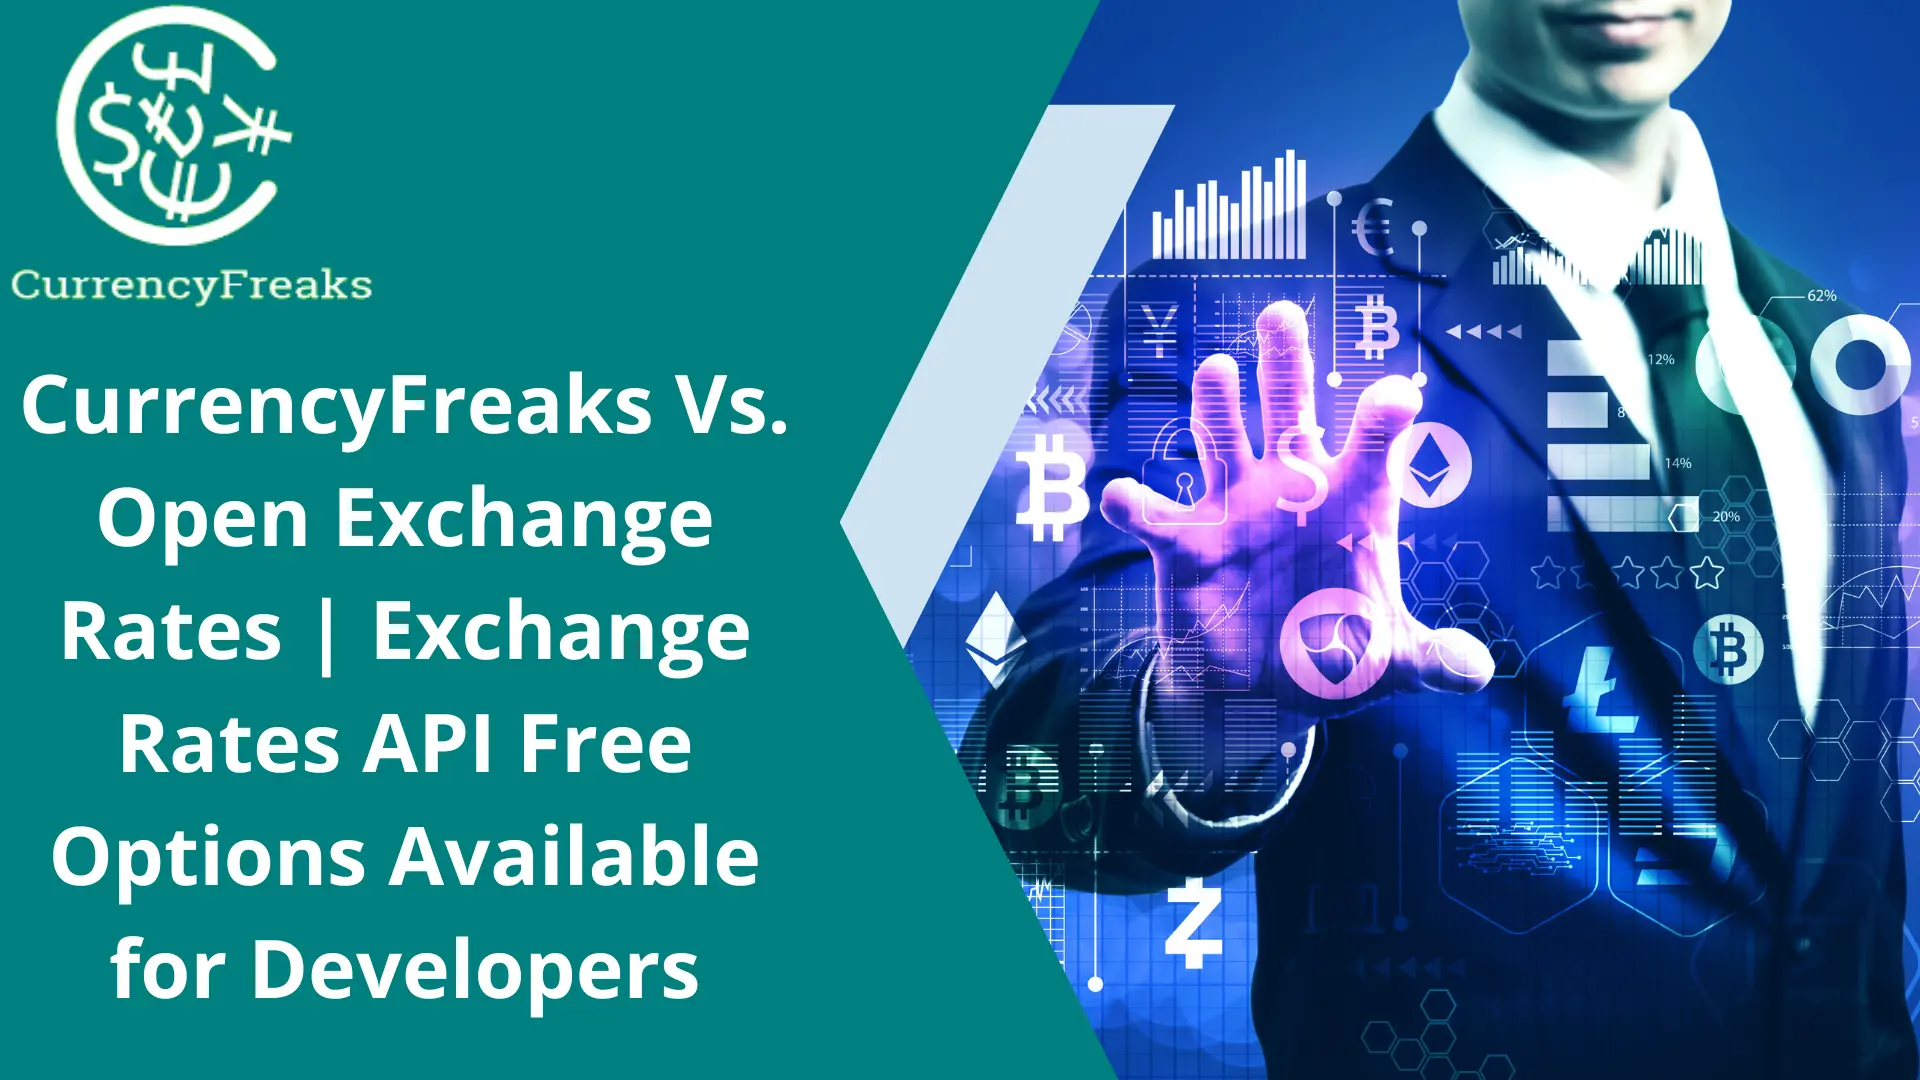 Open Exchange Rates API vs CurrencyFreaks | Exchange Rates API Free Options Available for Developers